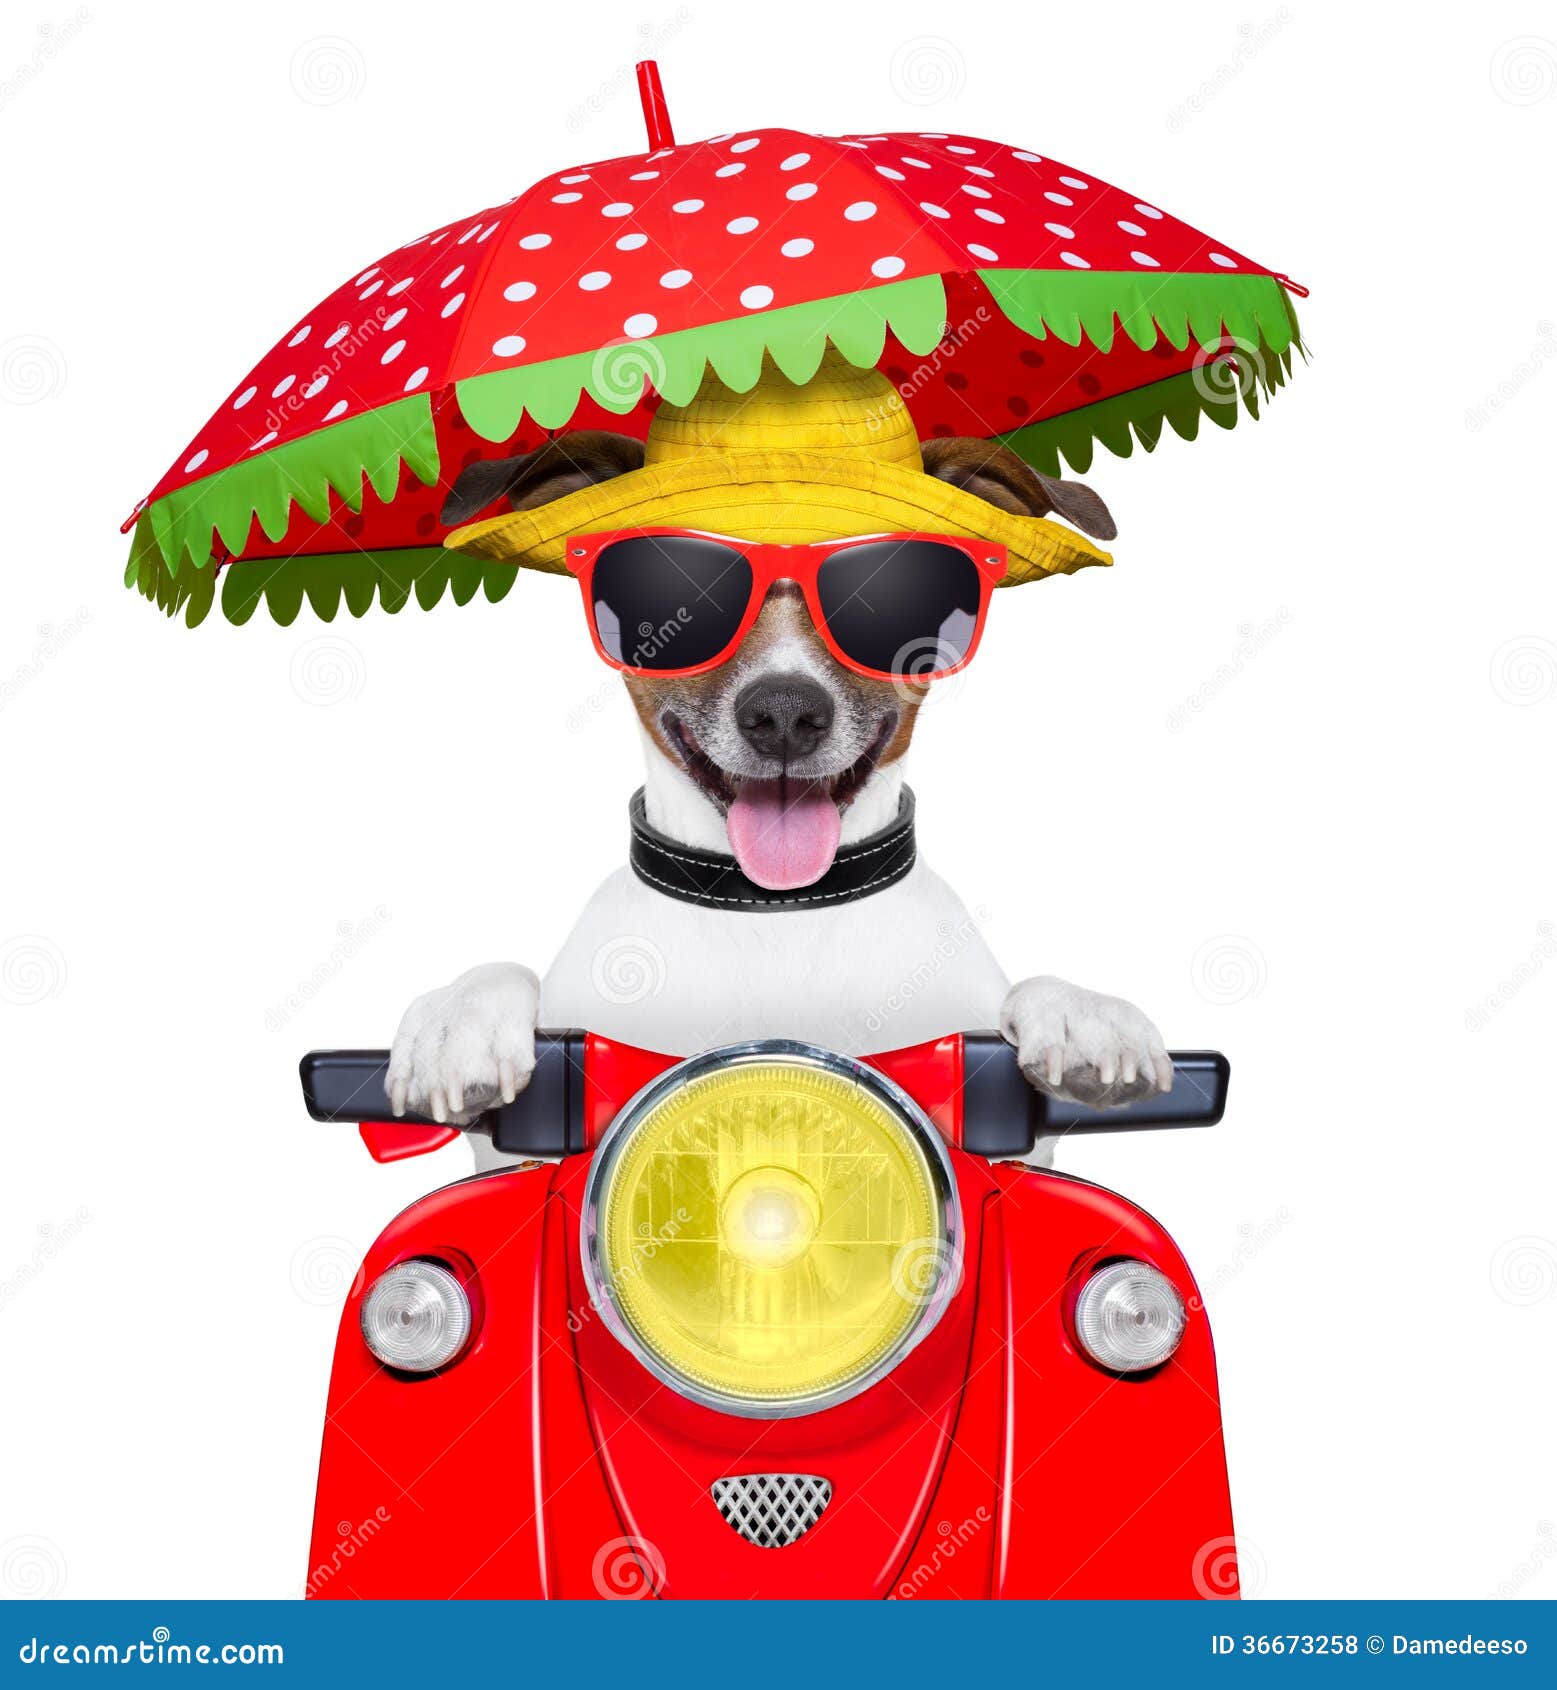 dog on motorcycle clipart - photo #38